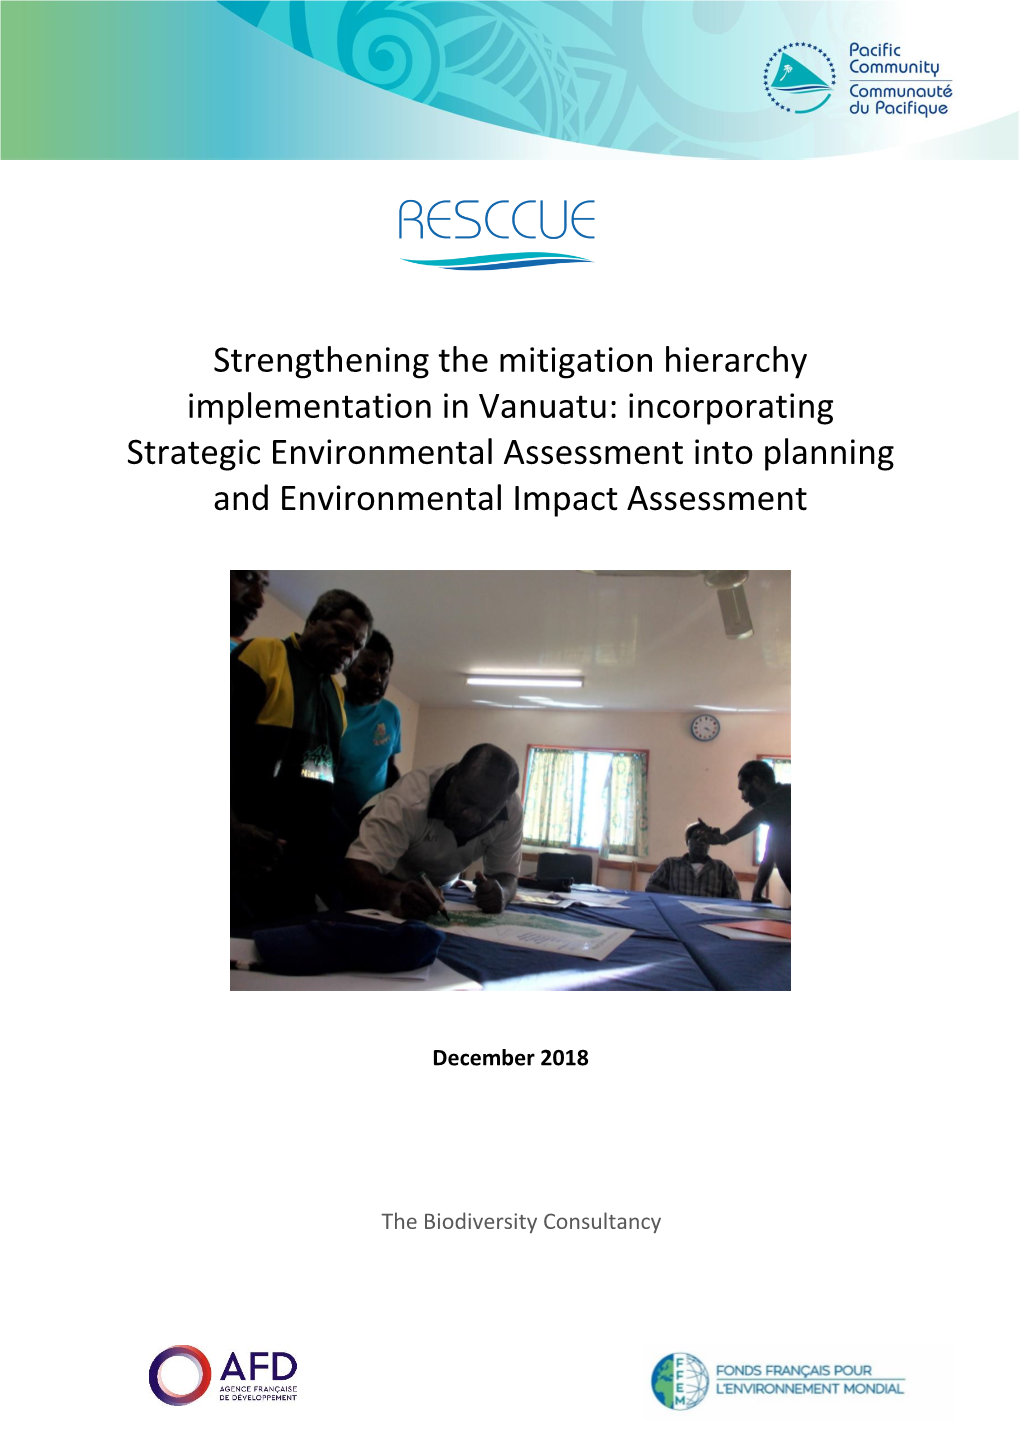 Strengthening the Mitigation Hierarchy Implementation in Vanuatu: Incorporating Strategic Environmental Assessment Into Planning and Environmental Impact Assessment